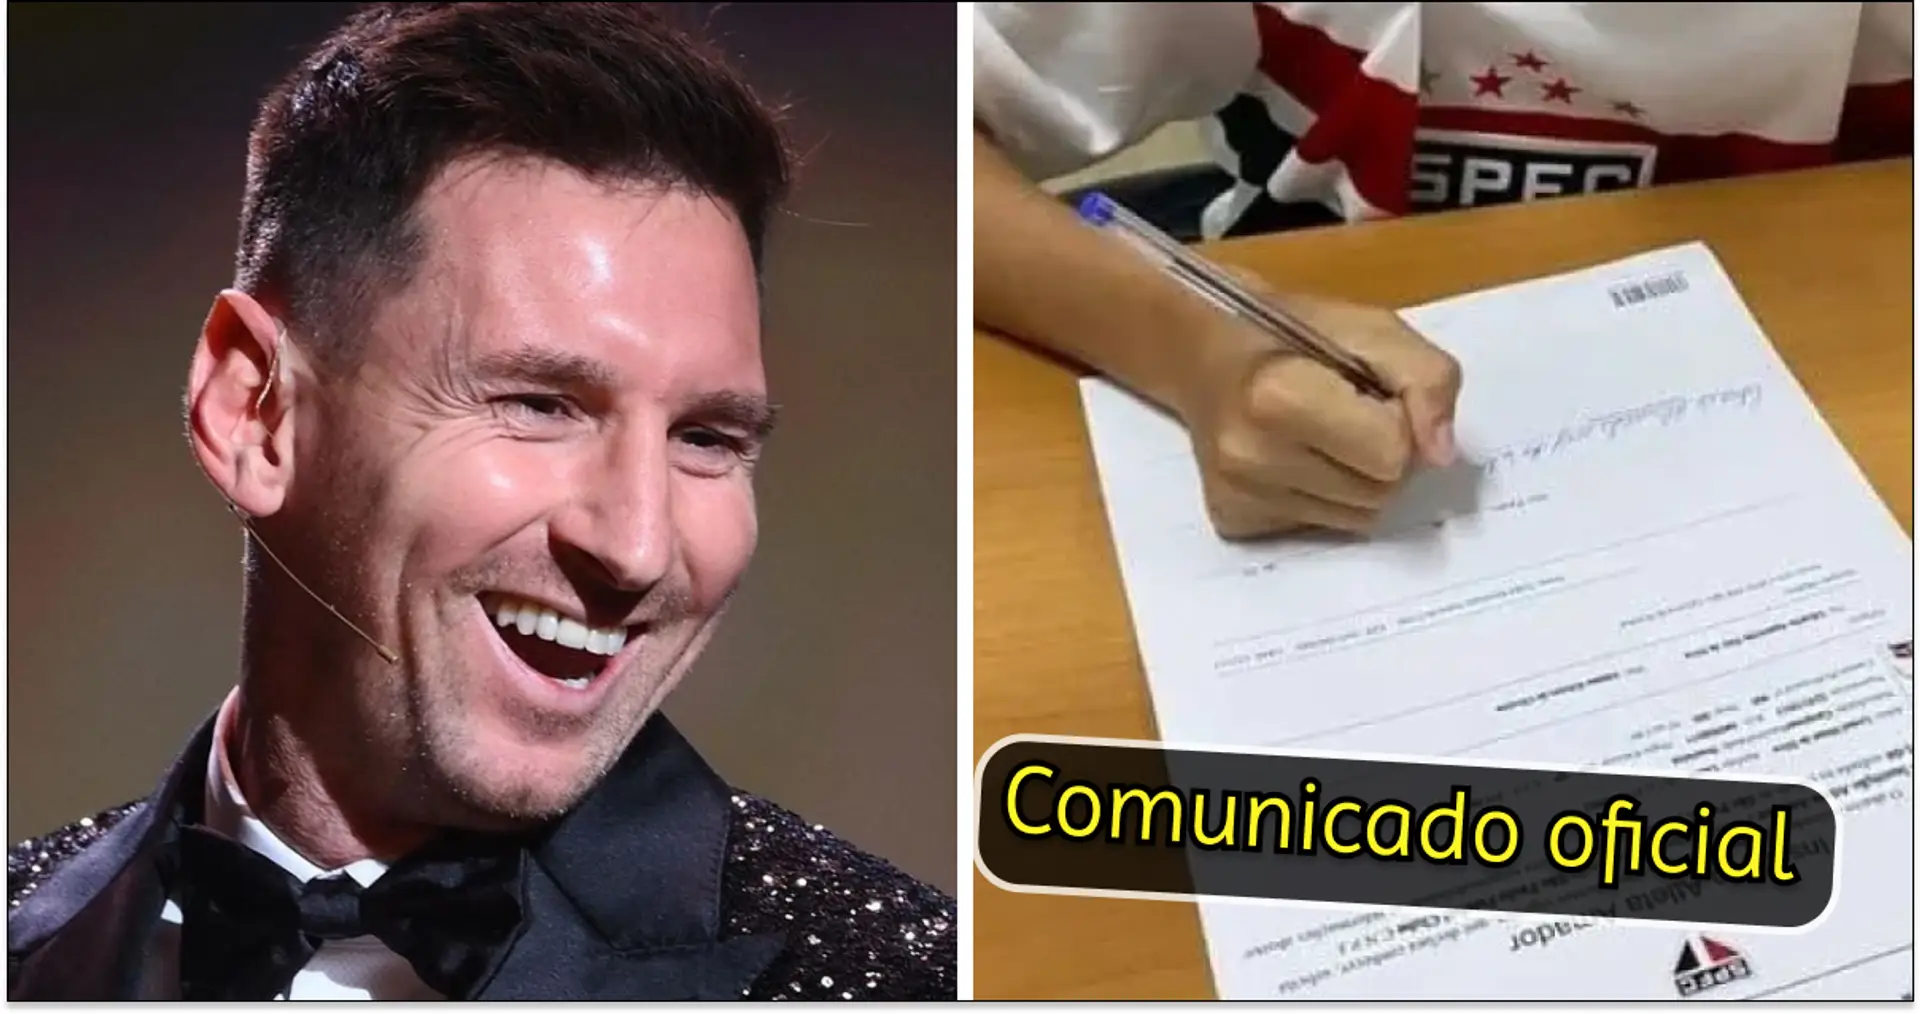 OFFICIAL: Lionel Messi signs contract with Sao Paulo — he's a 9-year-old Brazilian